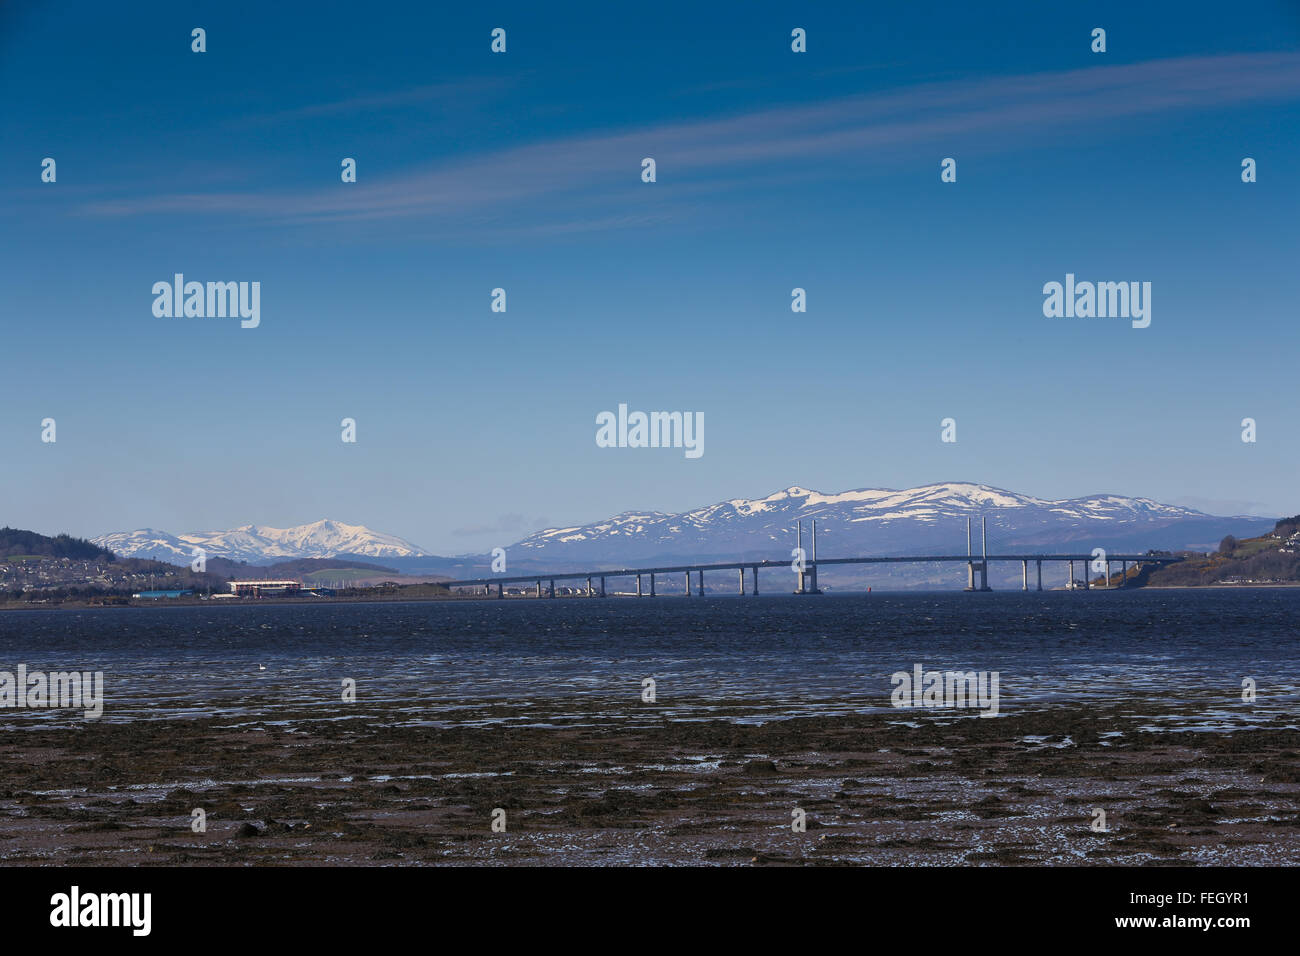 Kessock Bridge which connects the city of Inverness with the Black Isle across the Beauly Firth in the Highlands of Scotland, UK Stock Photo